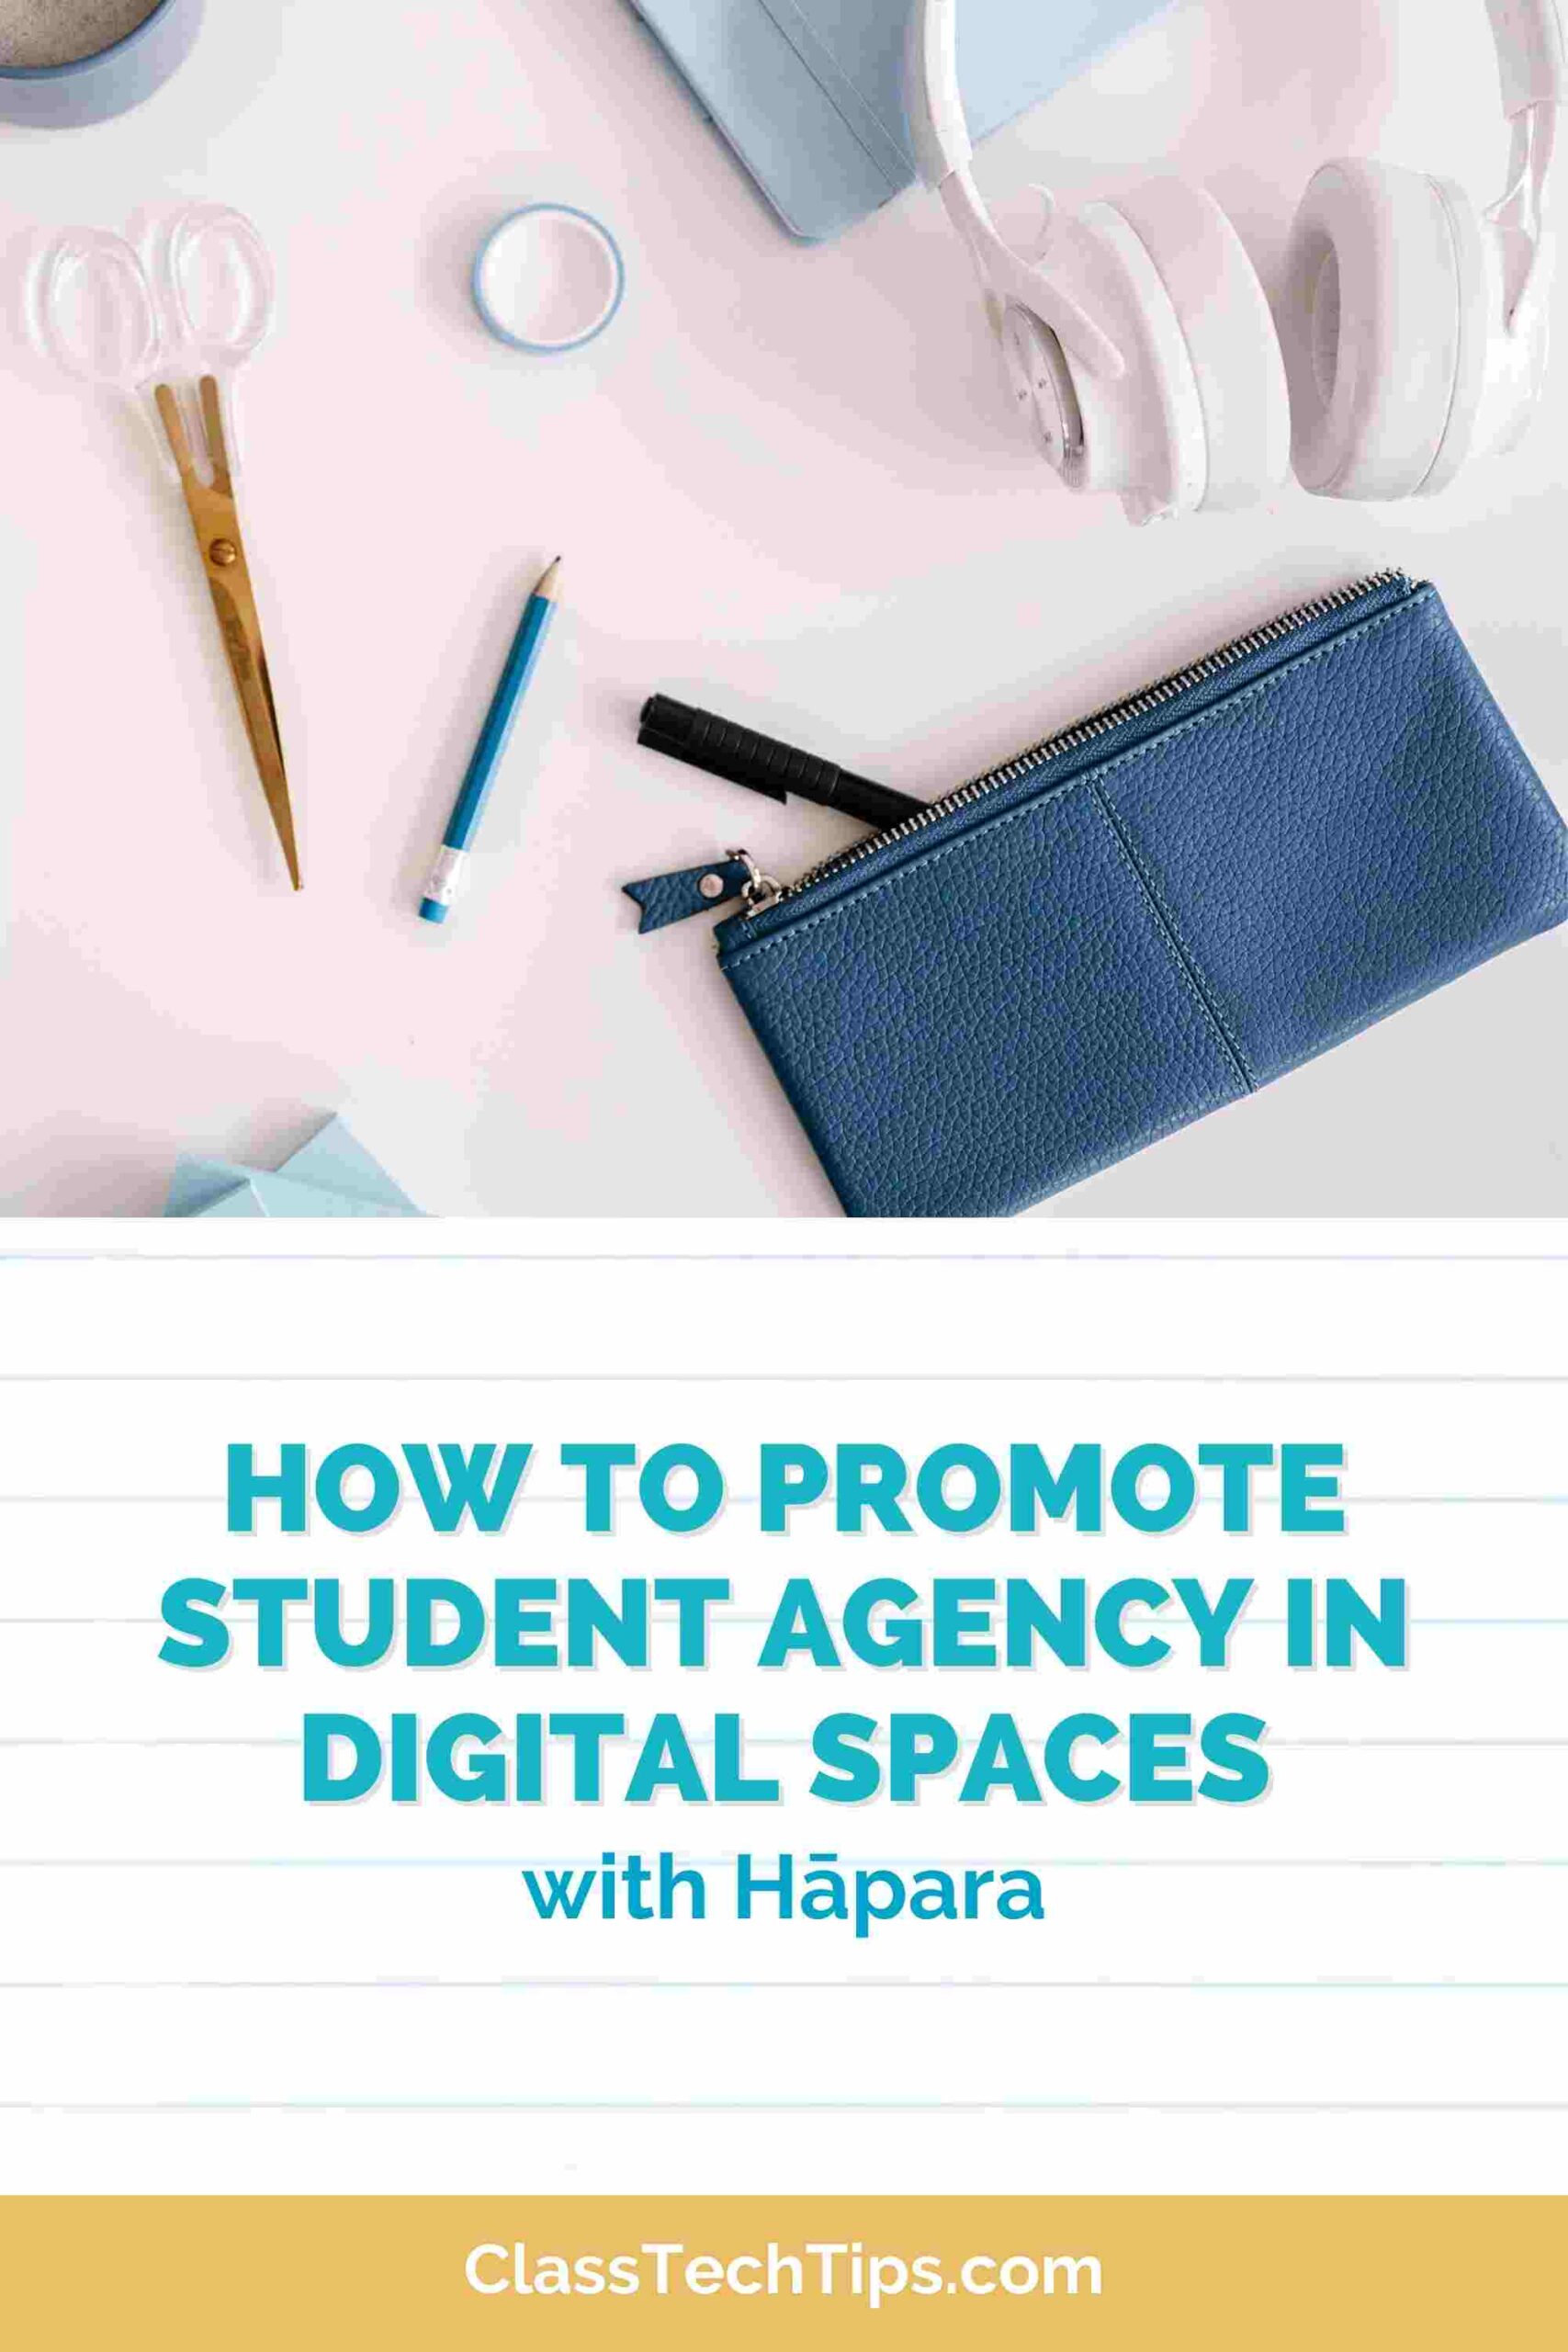 Student Agency with Hapara